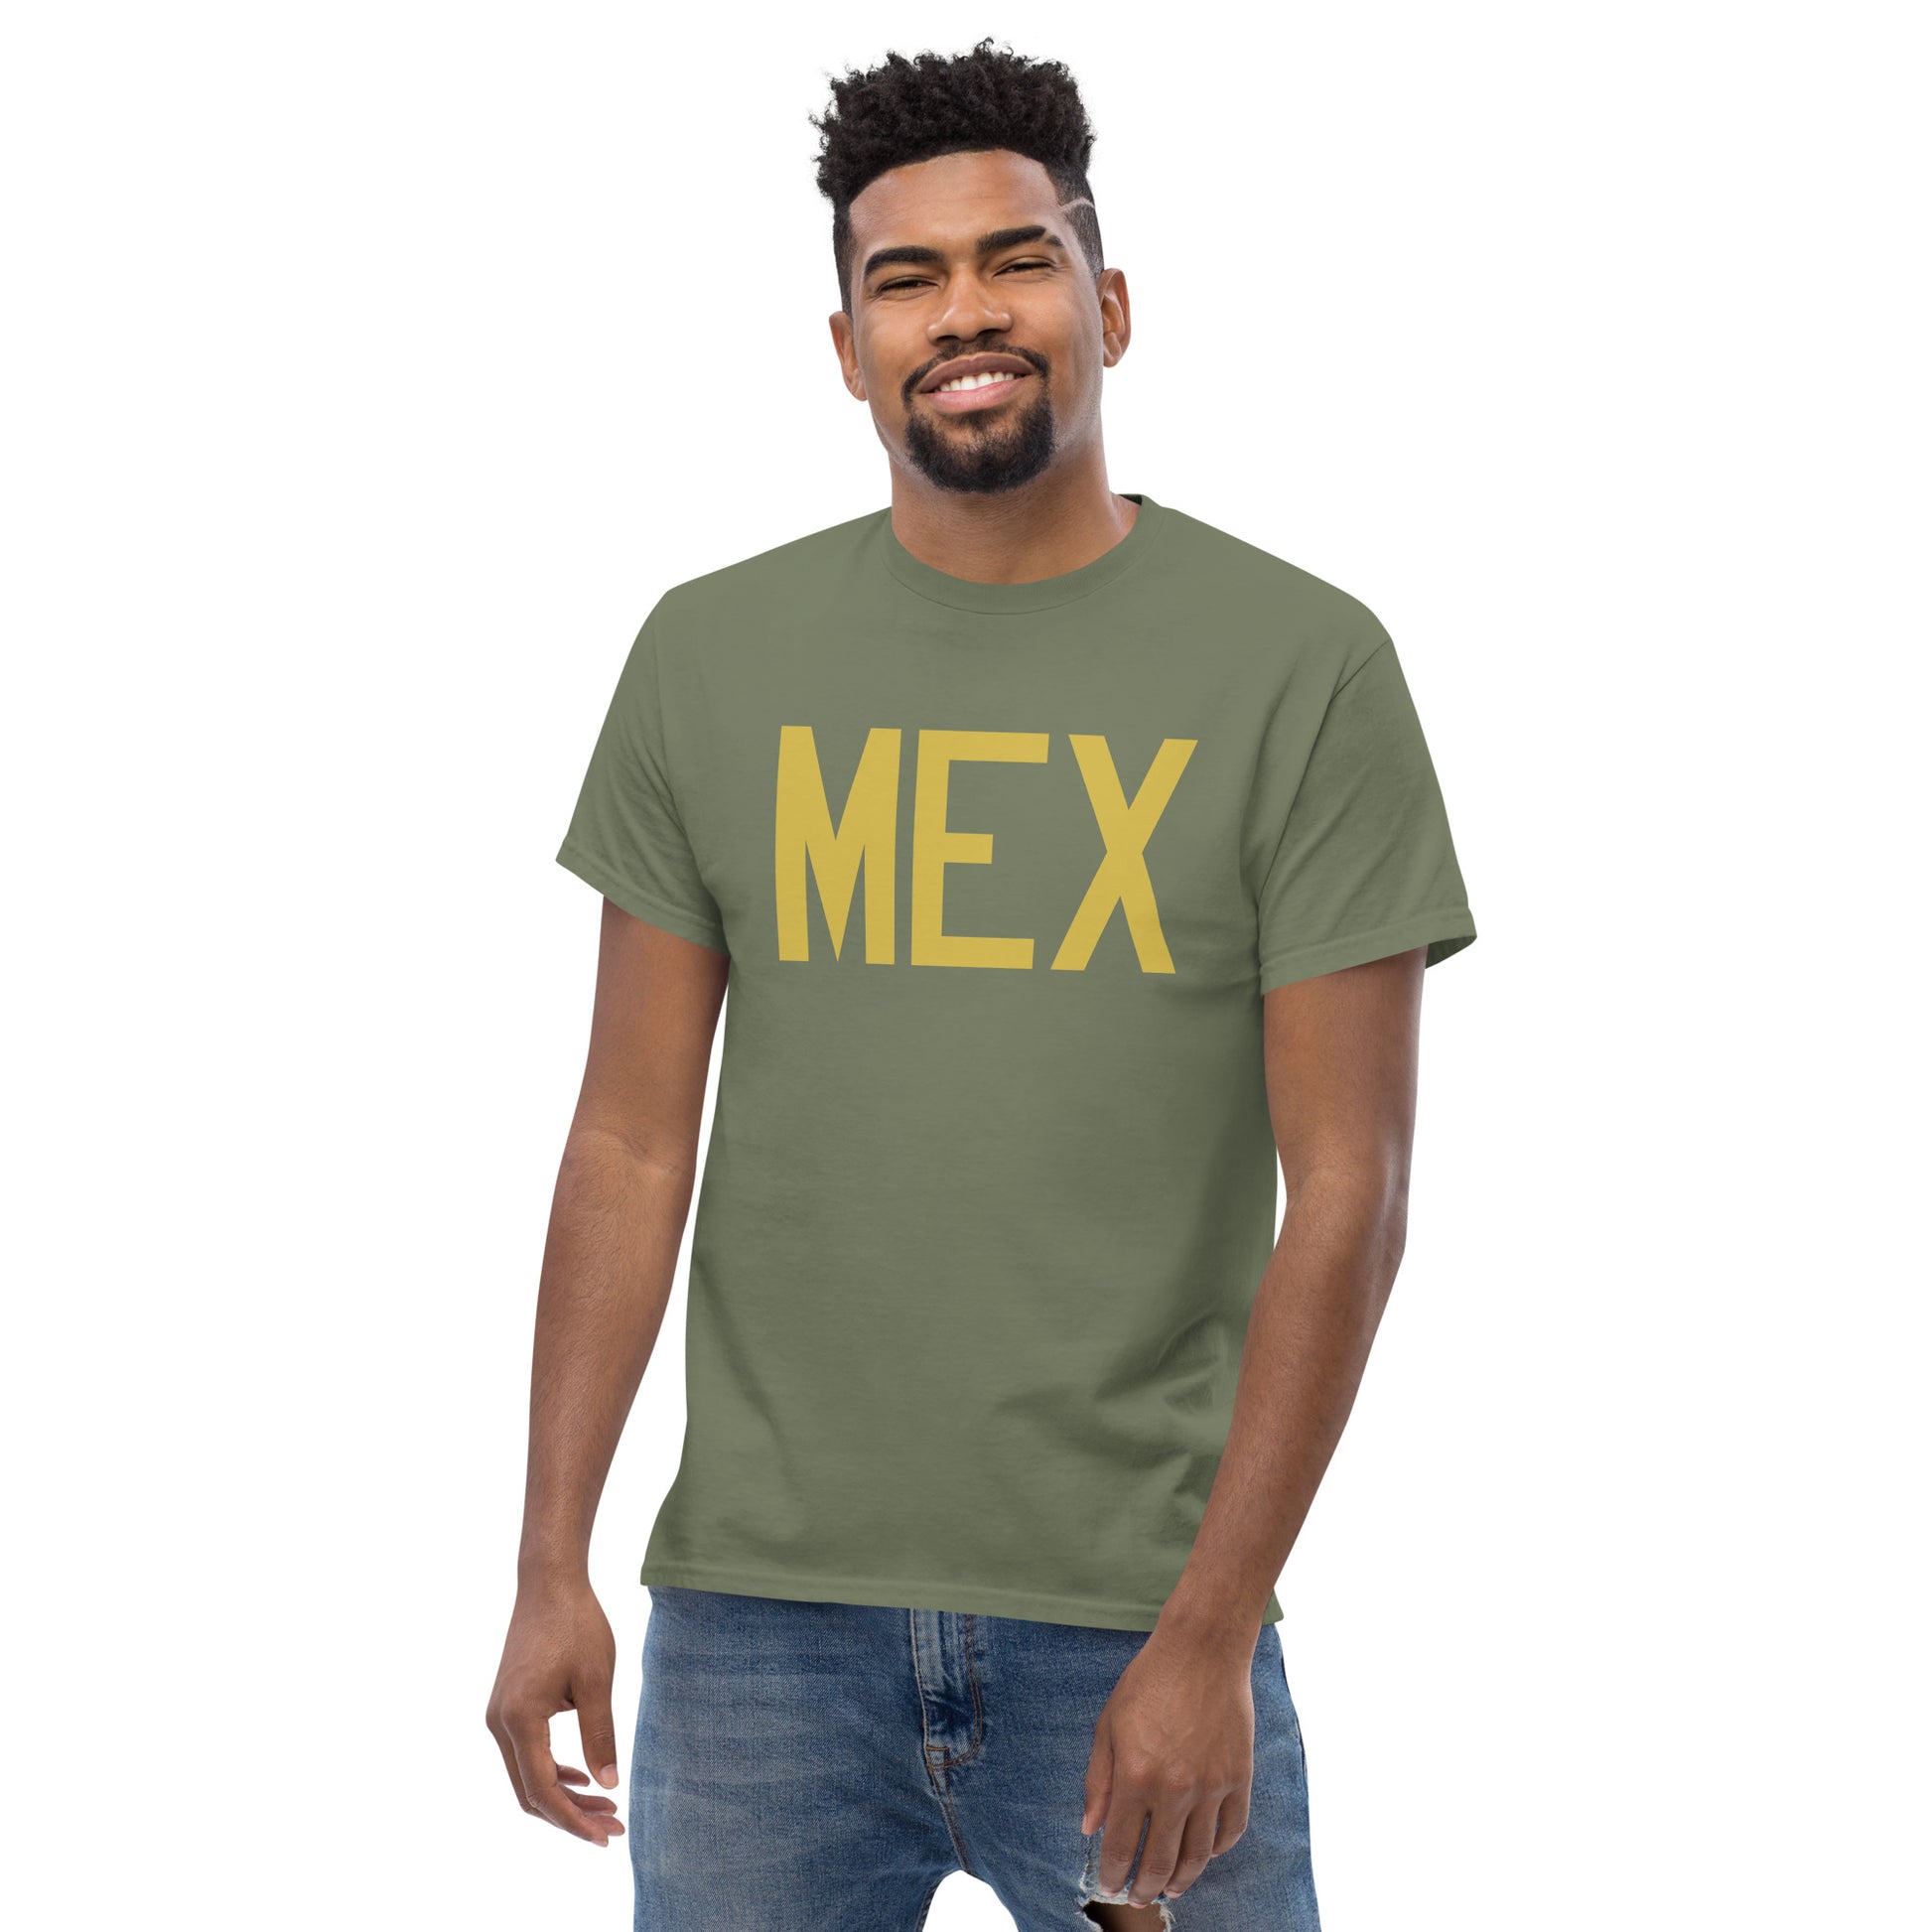 Aviation Enthusiast Men's Tee - Old Gold Graphic • MEX Mexico City • YHM Designs - Image 06